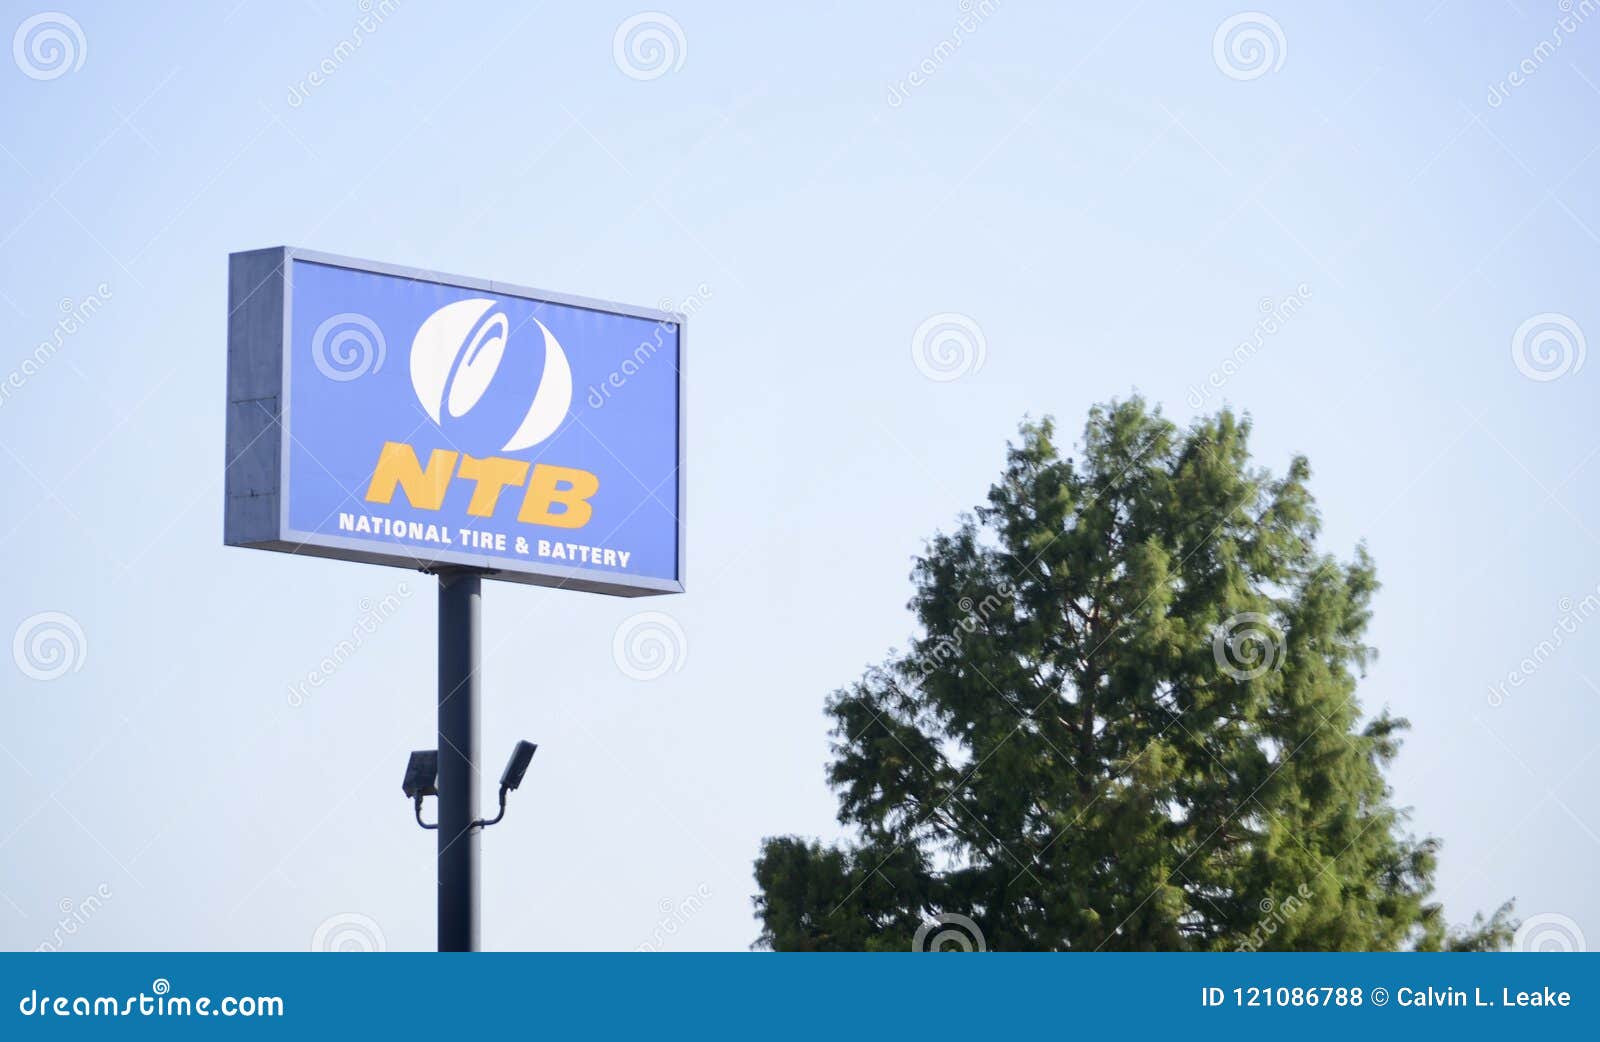 national tire and battery